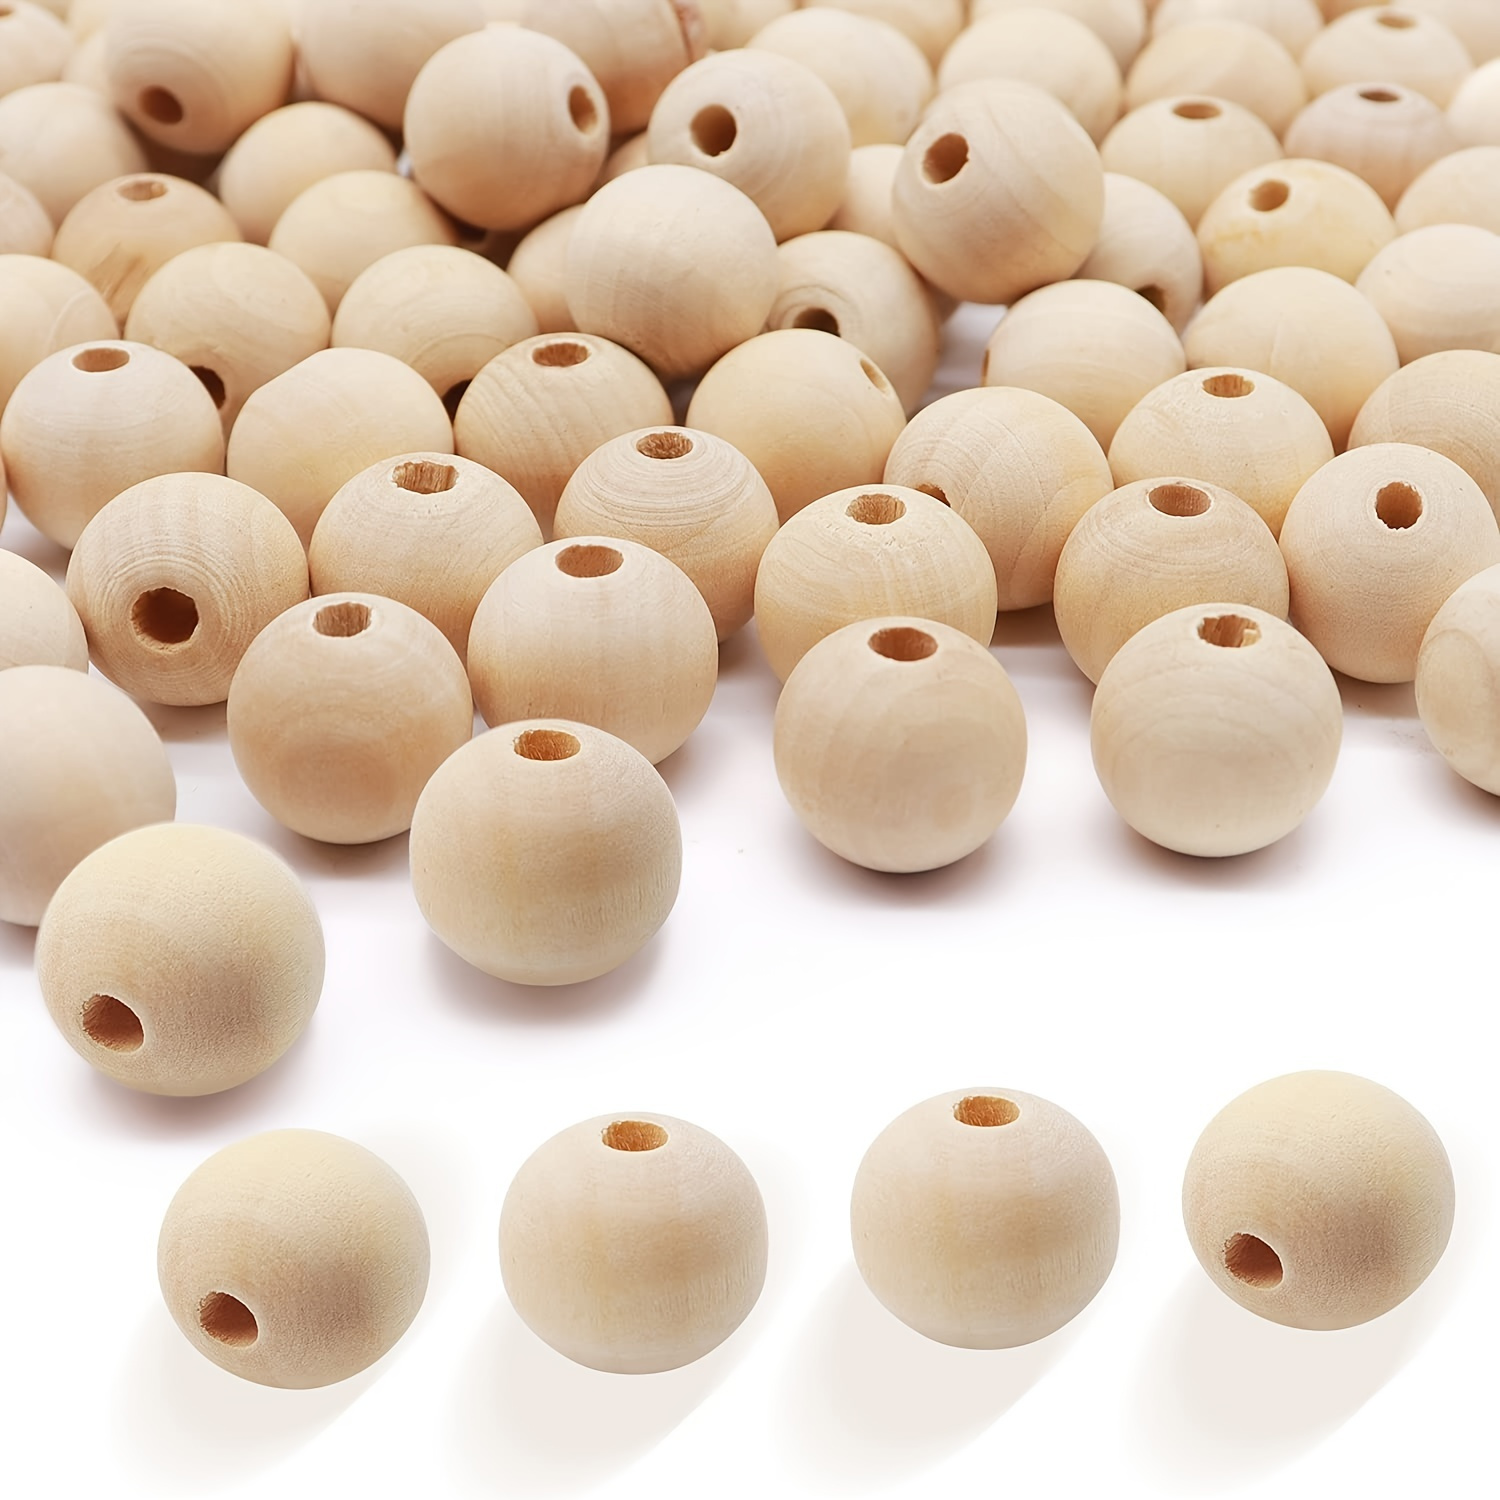 Natural Wooden Beads, 100 Pieces 20mm Diameter Round Loose Spacer Beads Large Hole (10mm) Wooden Craft Beads with Beautiful Grain for DIY Handmade